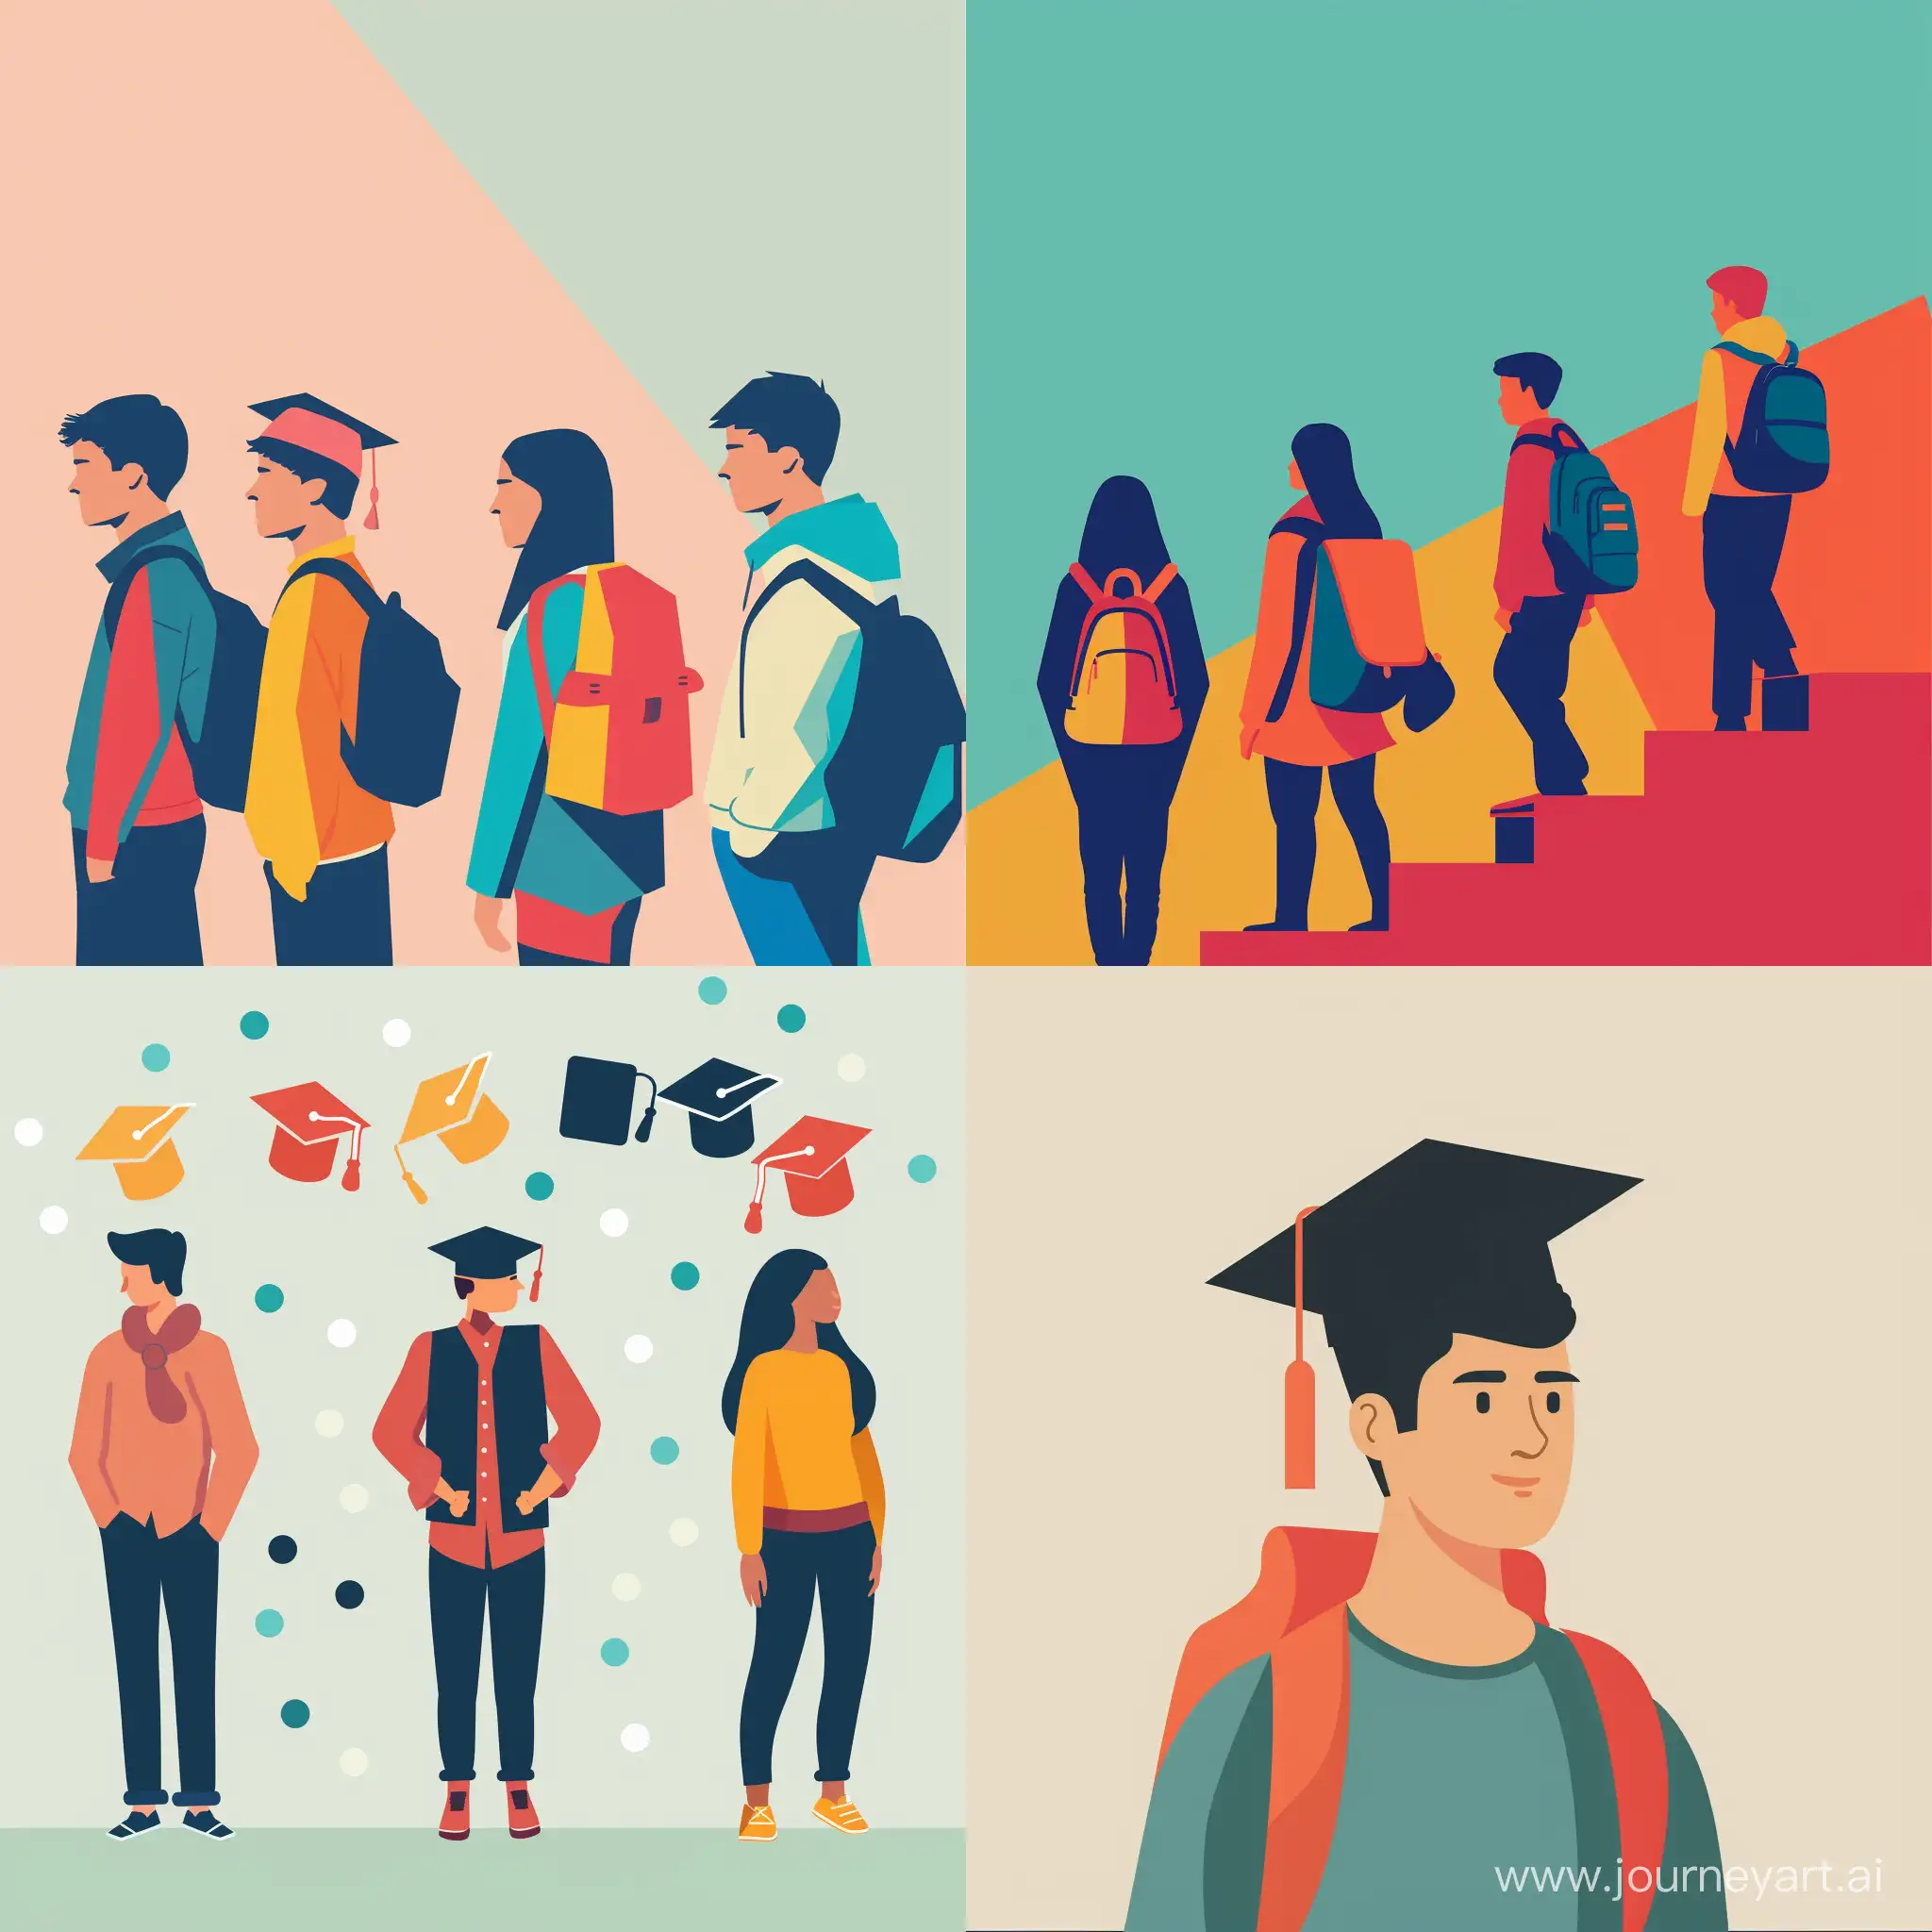 HighPaying-Student-and-Teen-Jobs-in-Minimalist-Graphic-Illustration